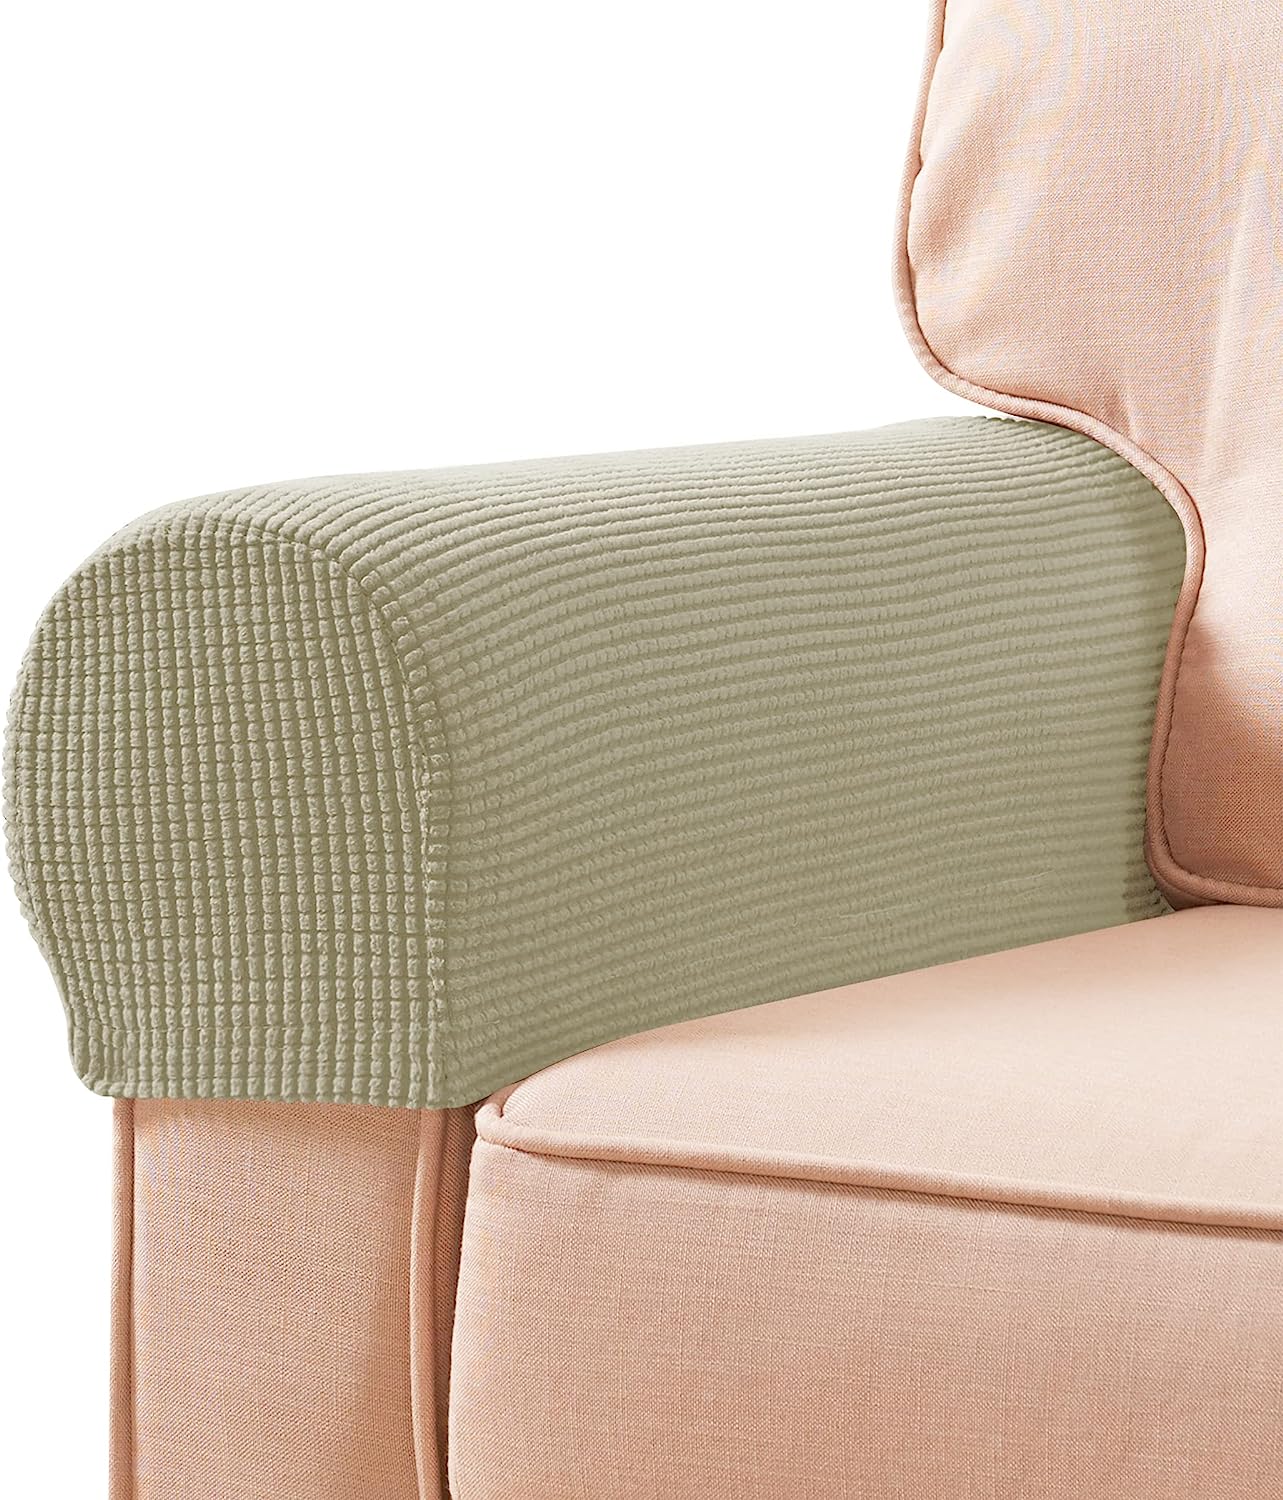 Sofa Arms Covers - Armrest Hero Covers